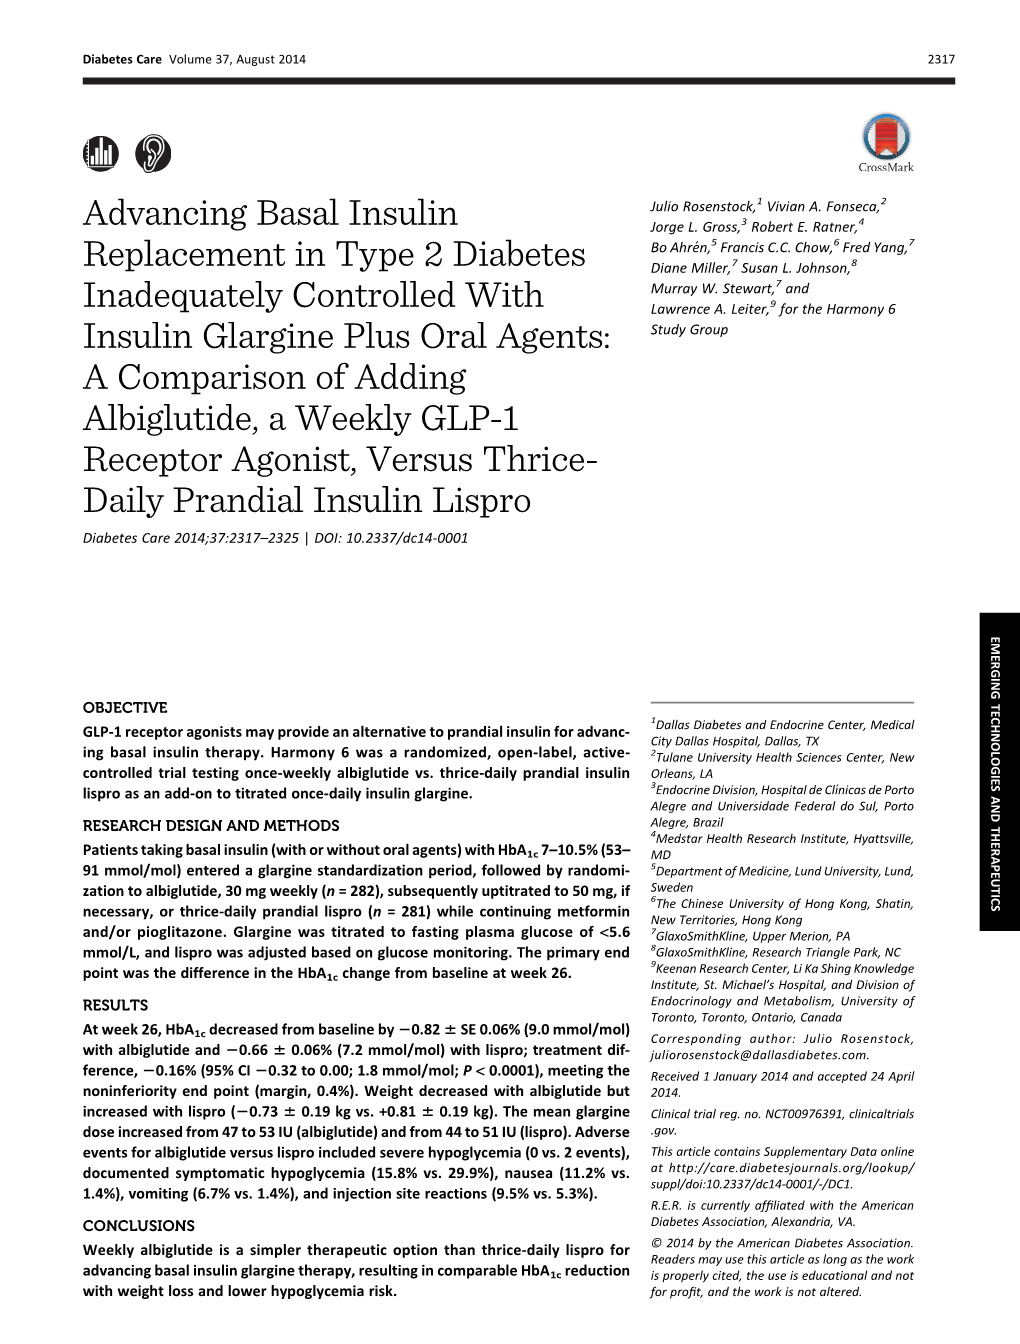 Advancing Basal Insulin Replacement in Type 2 Diabetes